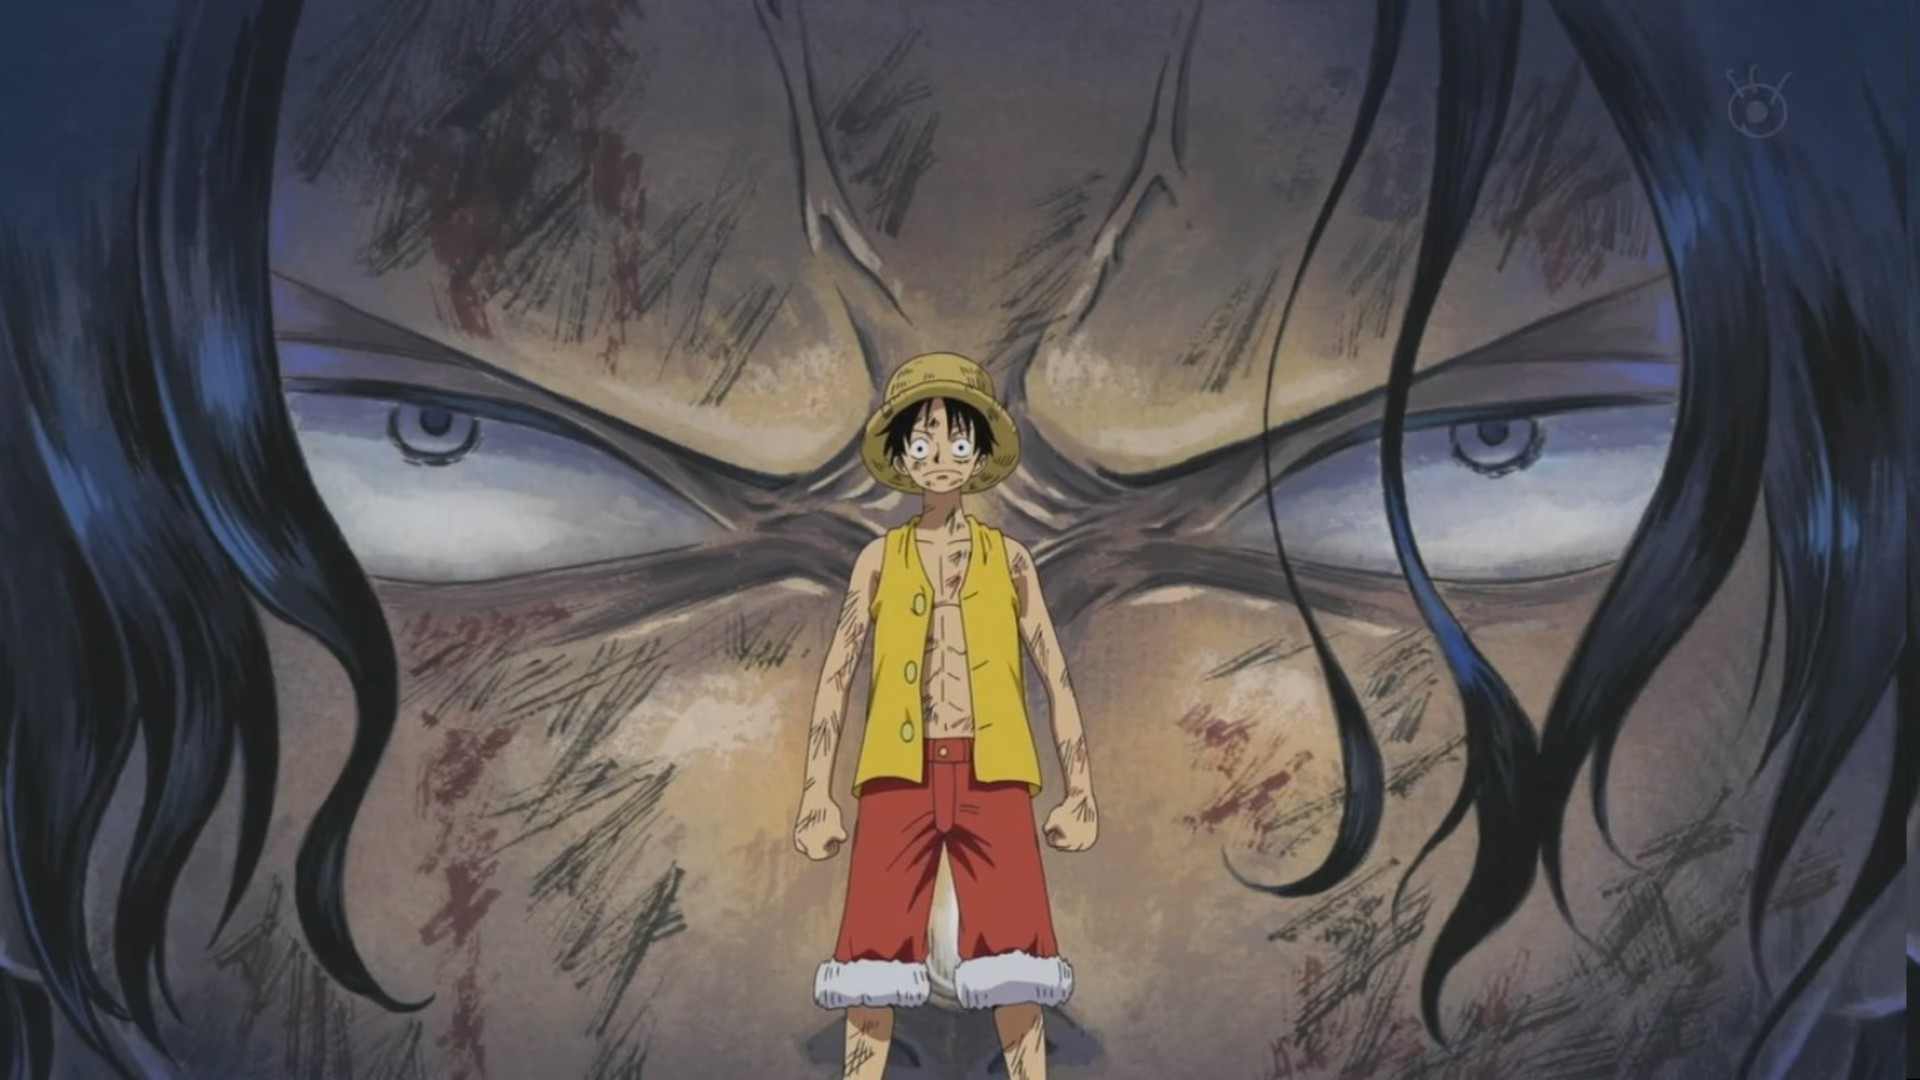 4596004 One Piece anime boys Monkey D Luffy  Rare Gallery HD Wallpapers